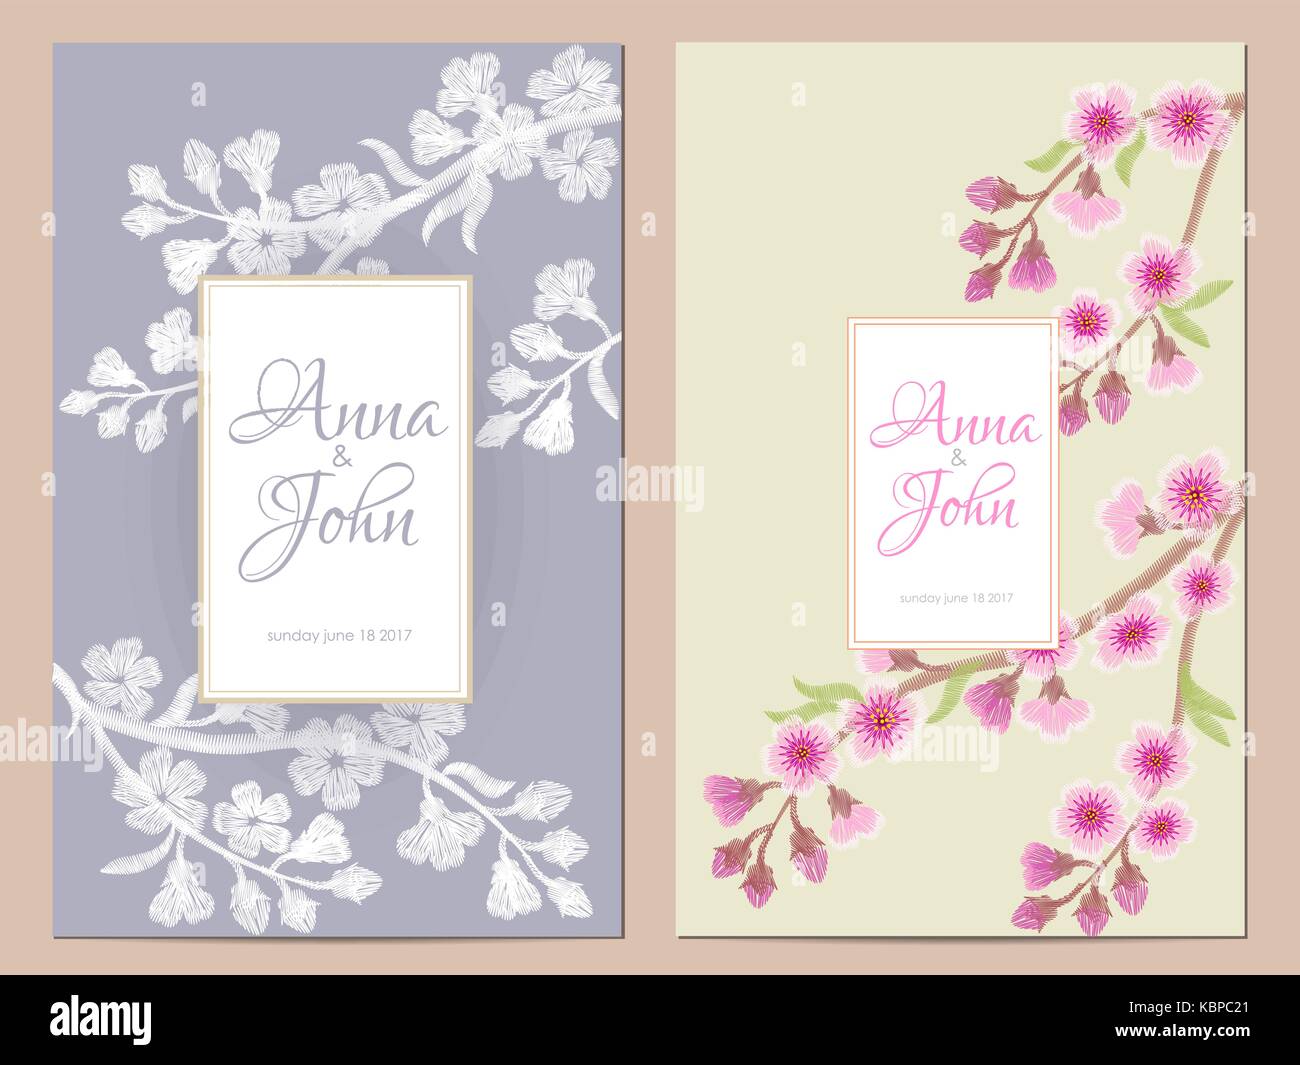 Delicate flowers sakura blossom wedding invitation. Save the date greeting card floral design. Oriental rustic traditional vintage embroidery vector t Stock Vector